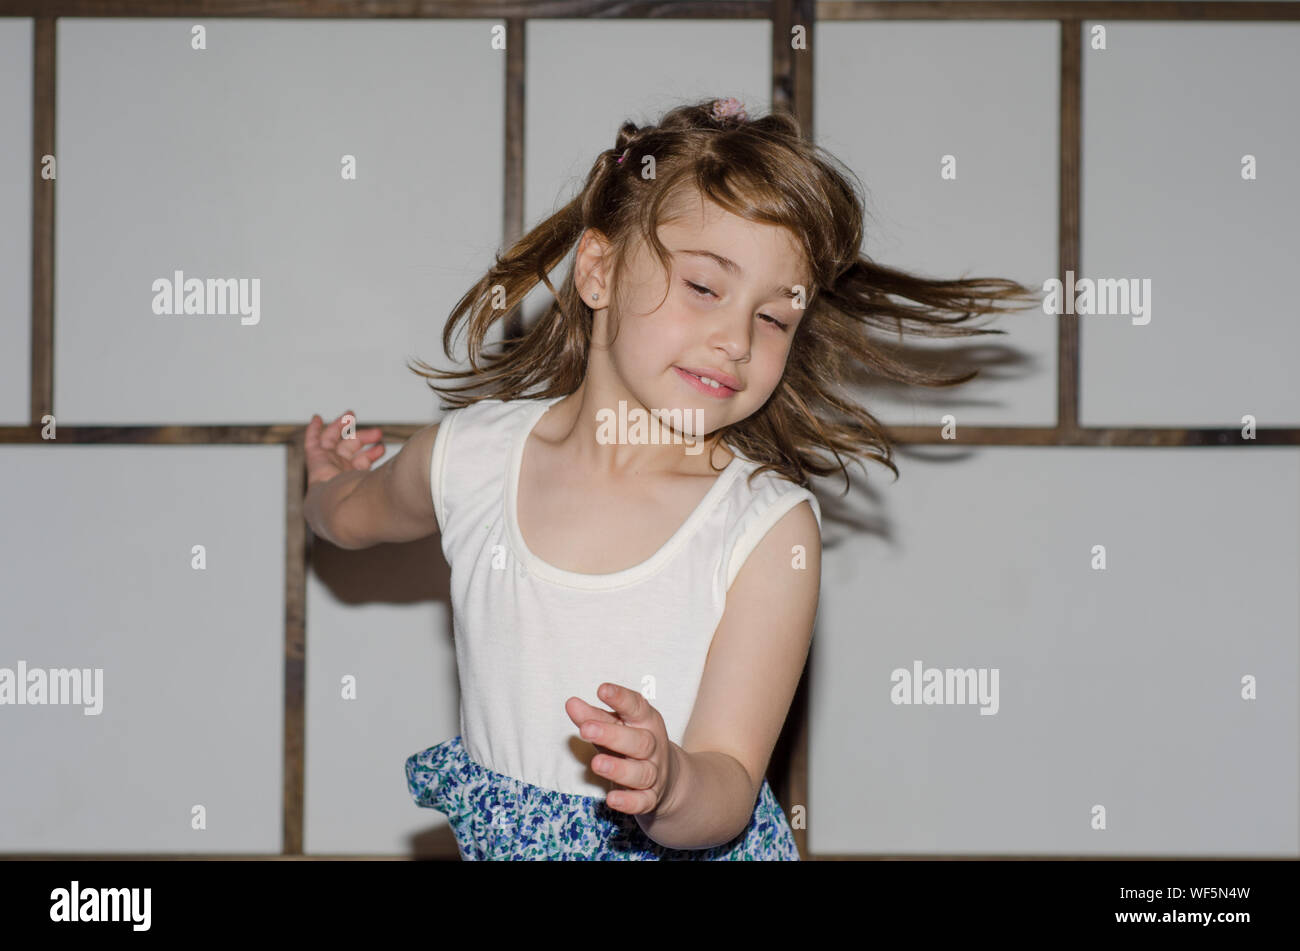 Excited Girl With Tousled Hair Jumping Against Wall At Home Stock Photo